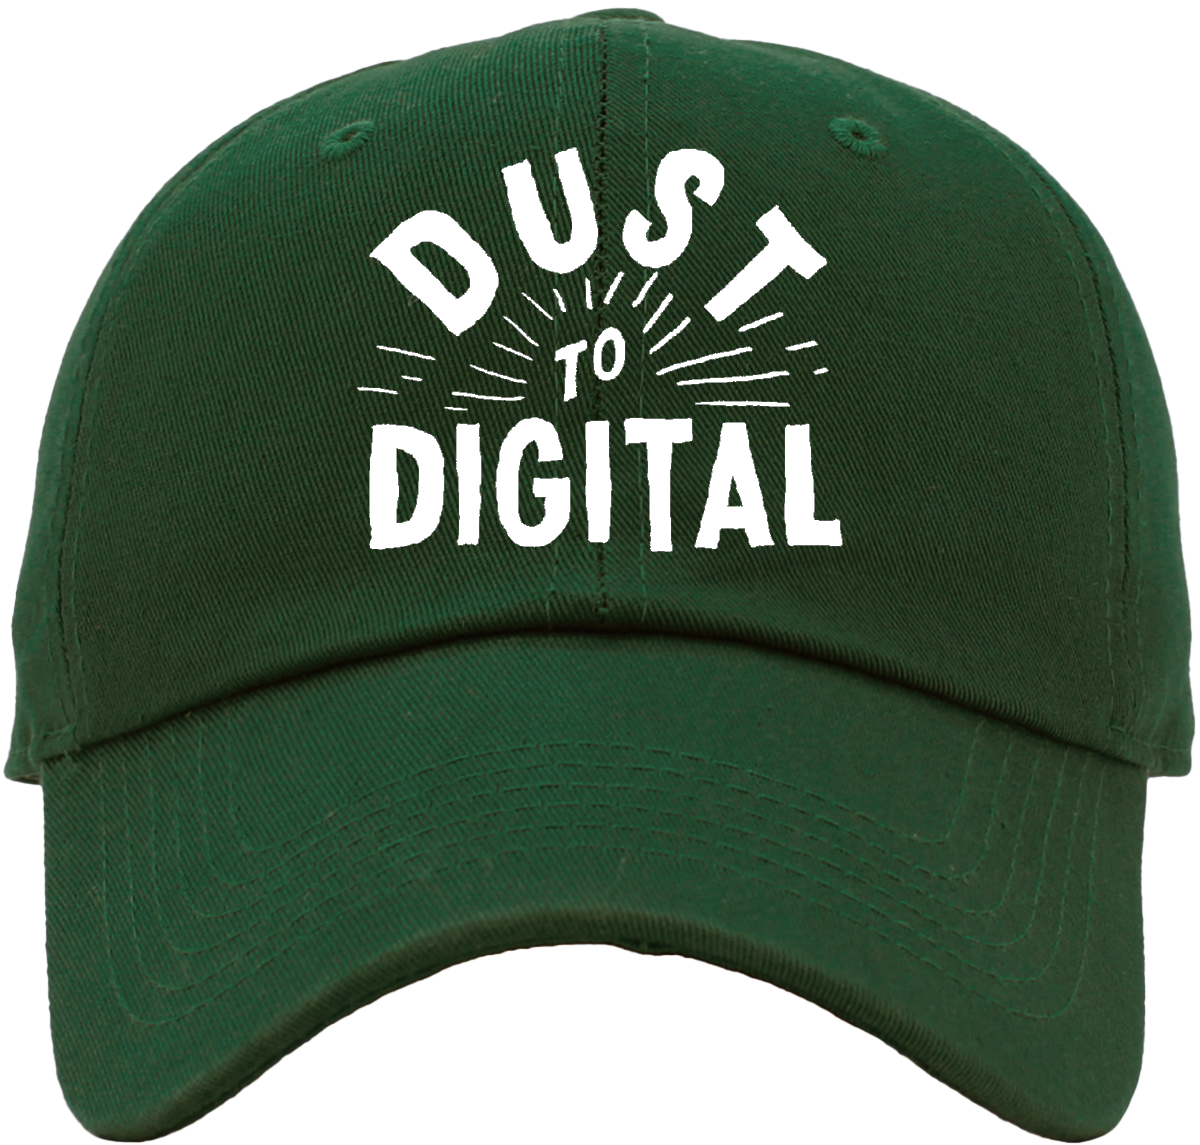 Blue, Green, Dust-to-Digital (Available Baseball and | in Burgundy) Hat